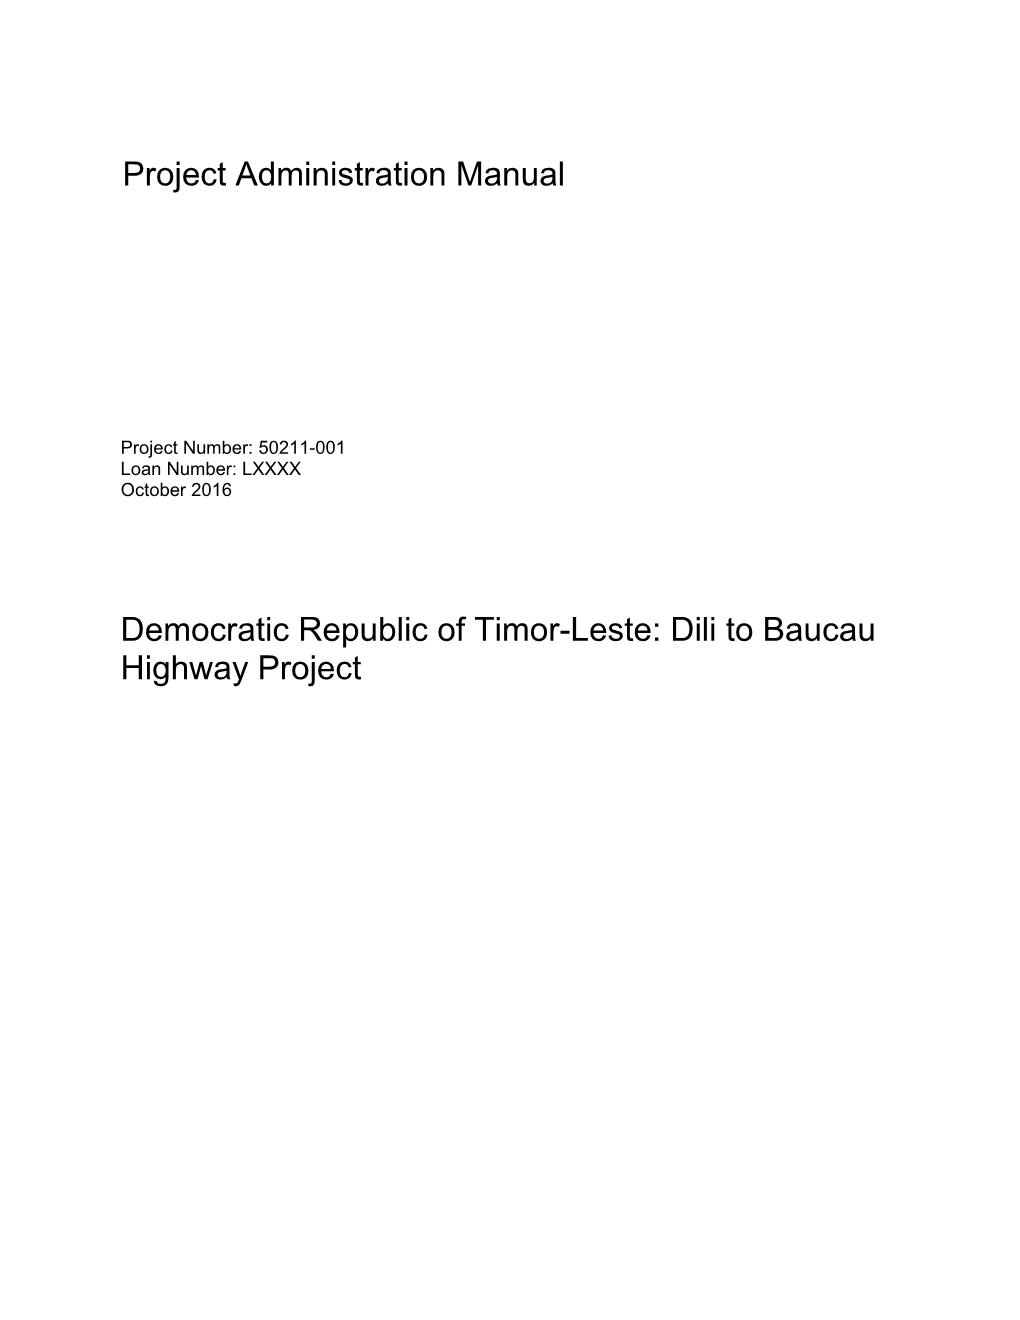 Dili to Baucau Highway Project Project Administration Manual